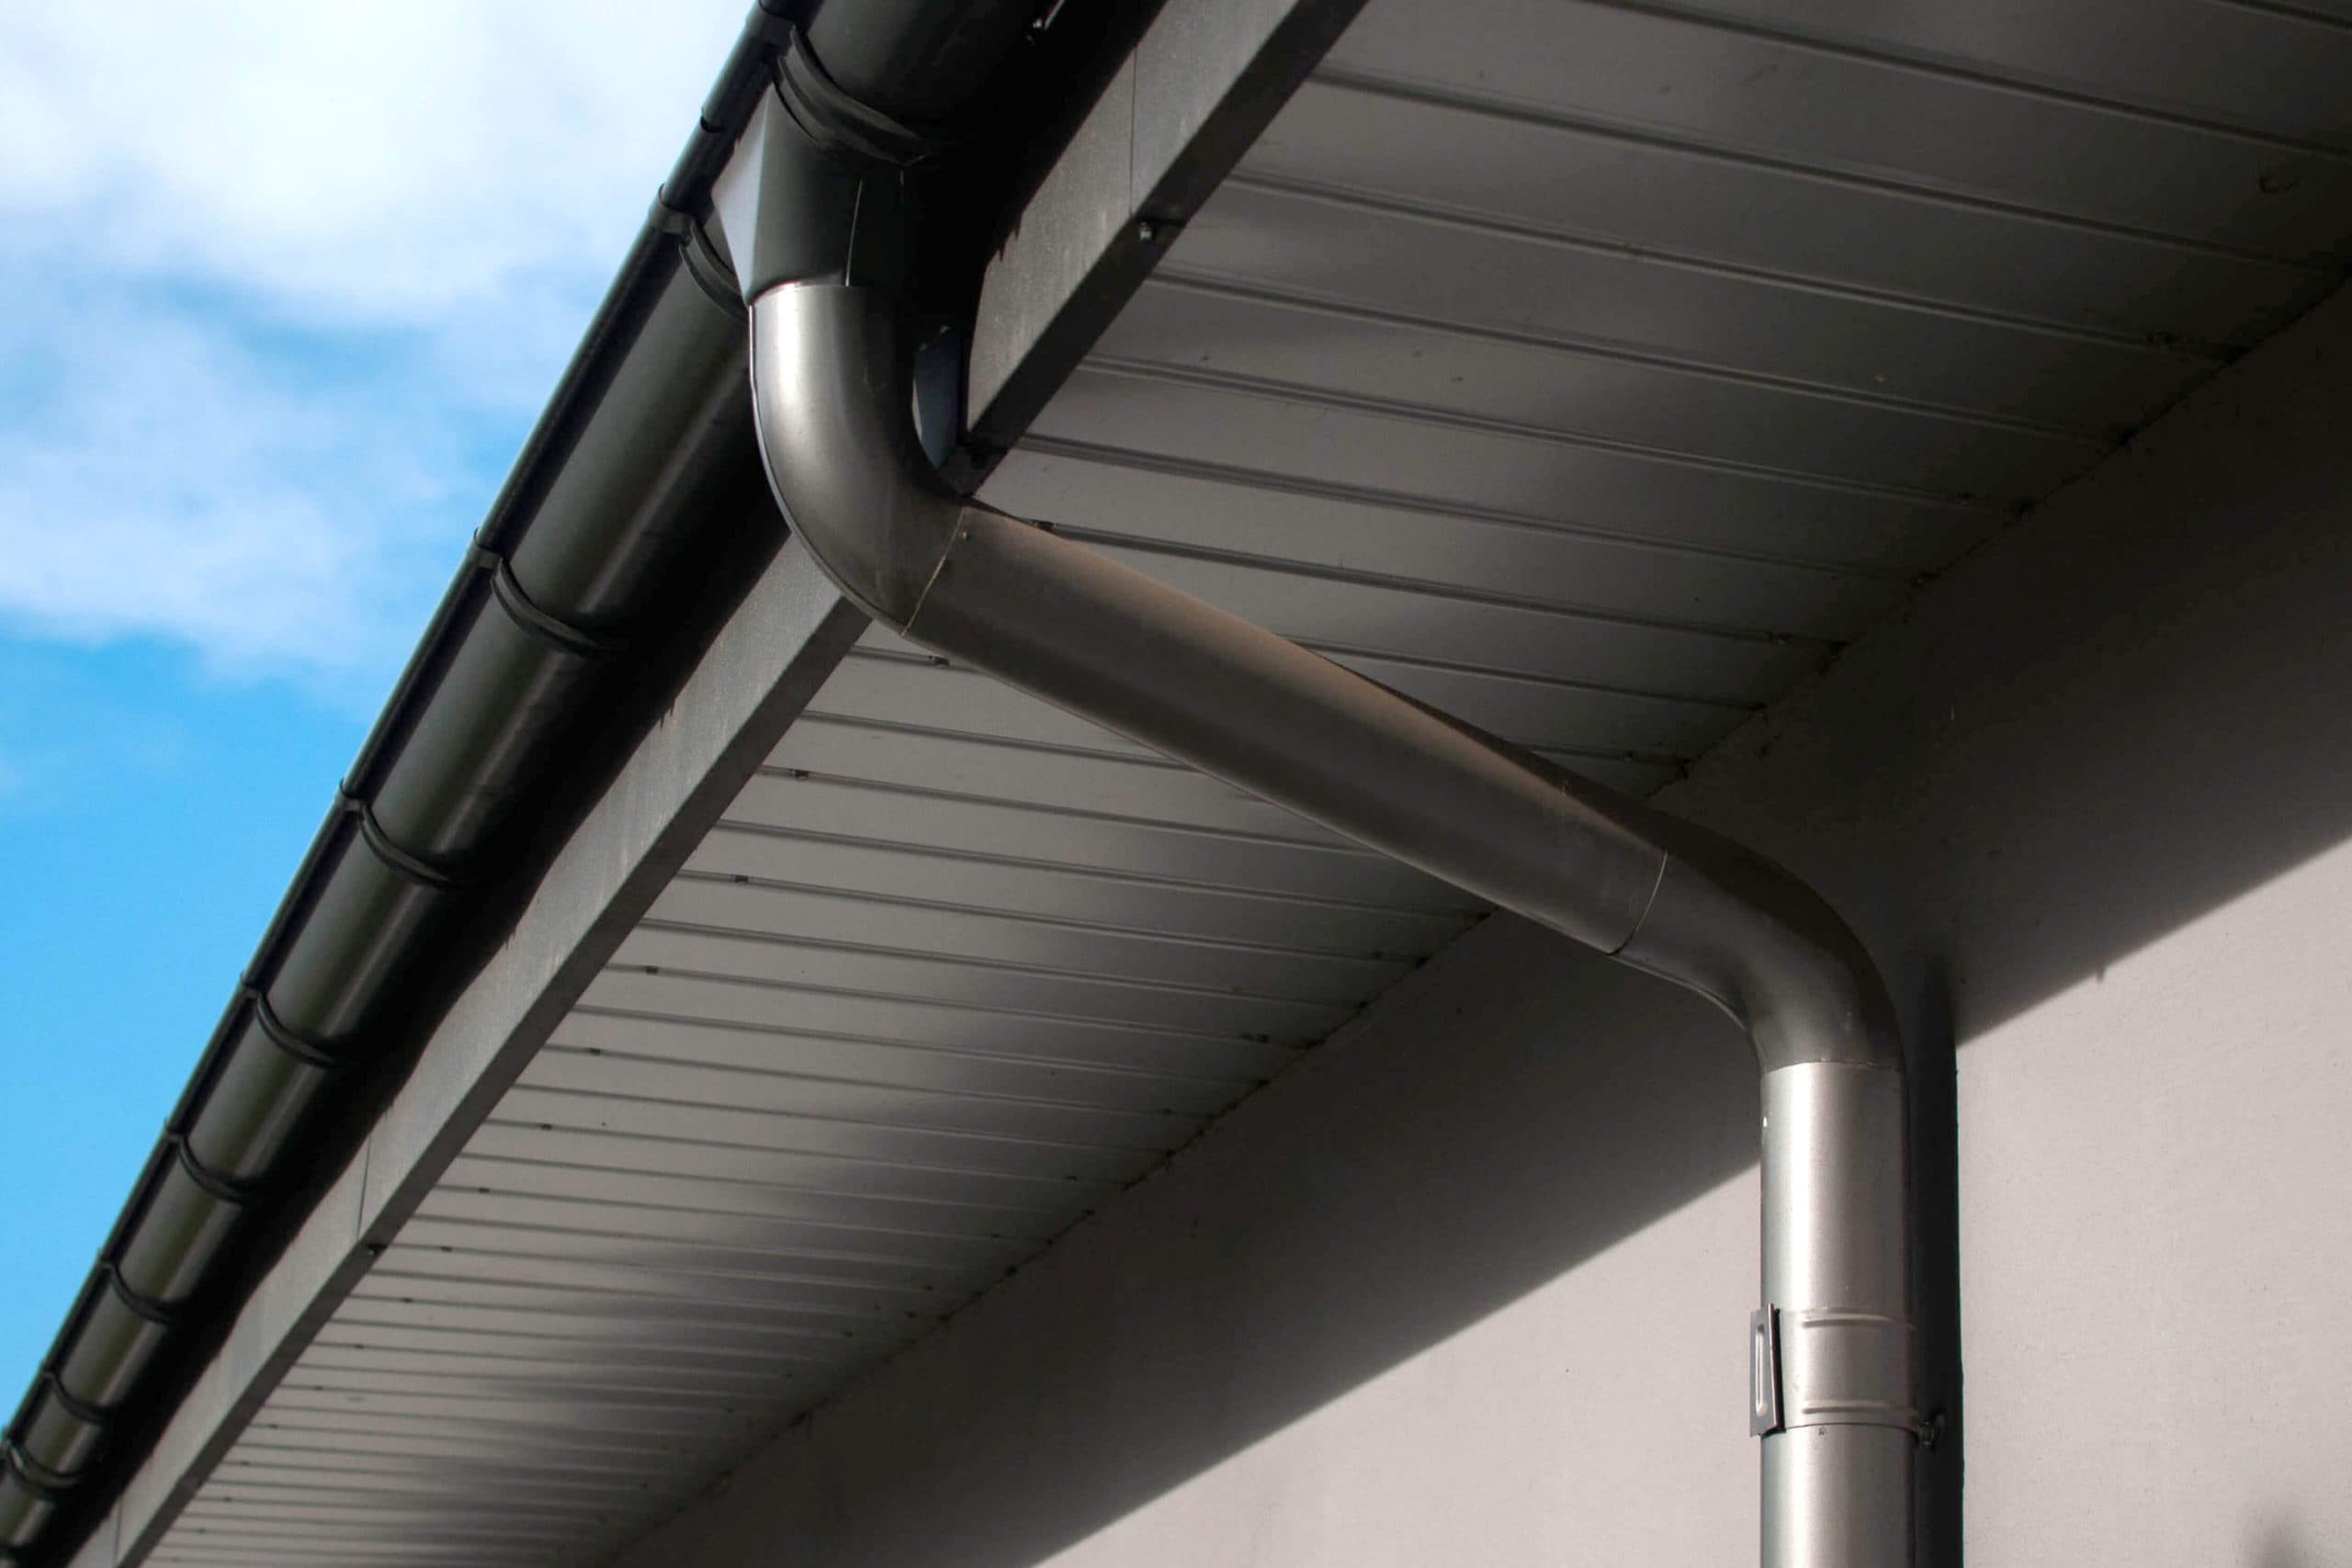 Corrosion-resistant galvanized gutters installed on a commercial building in Greenville